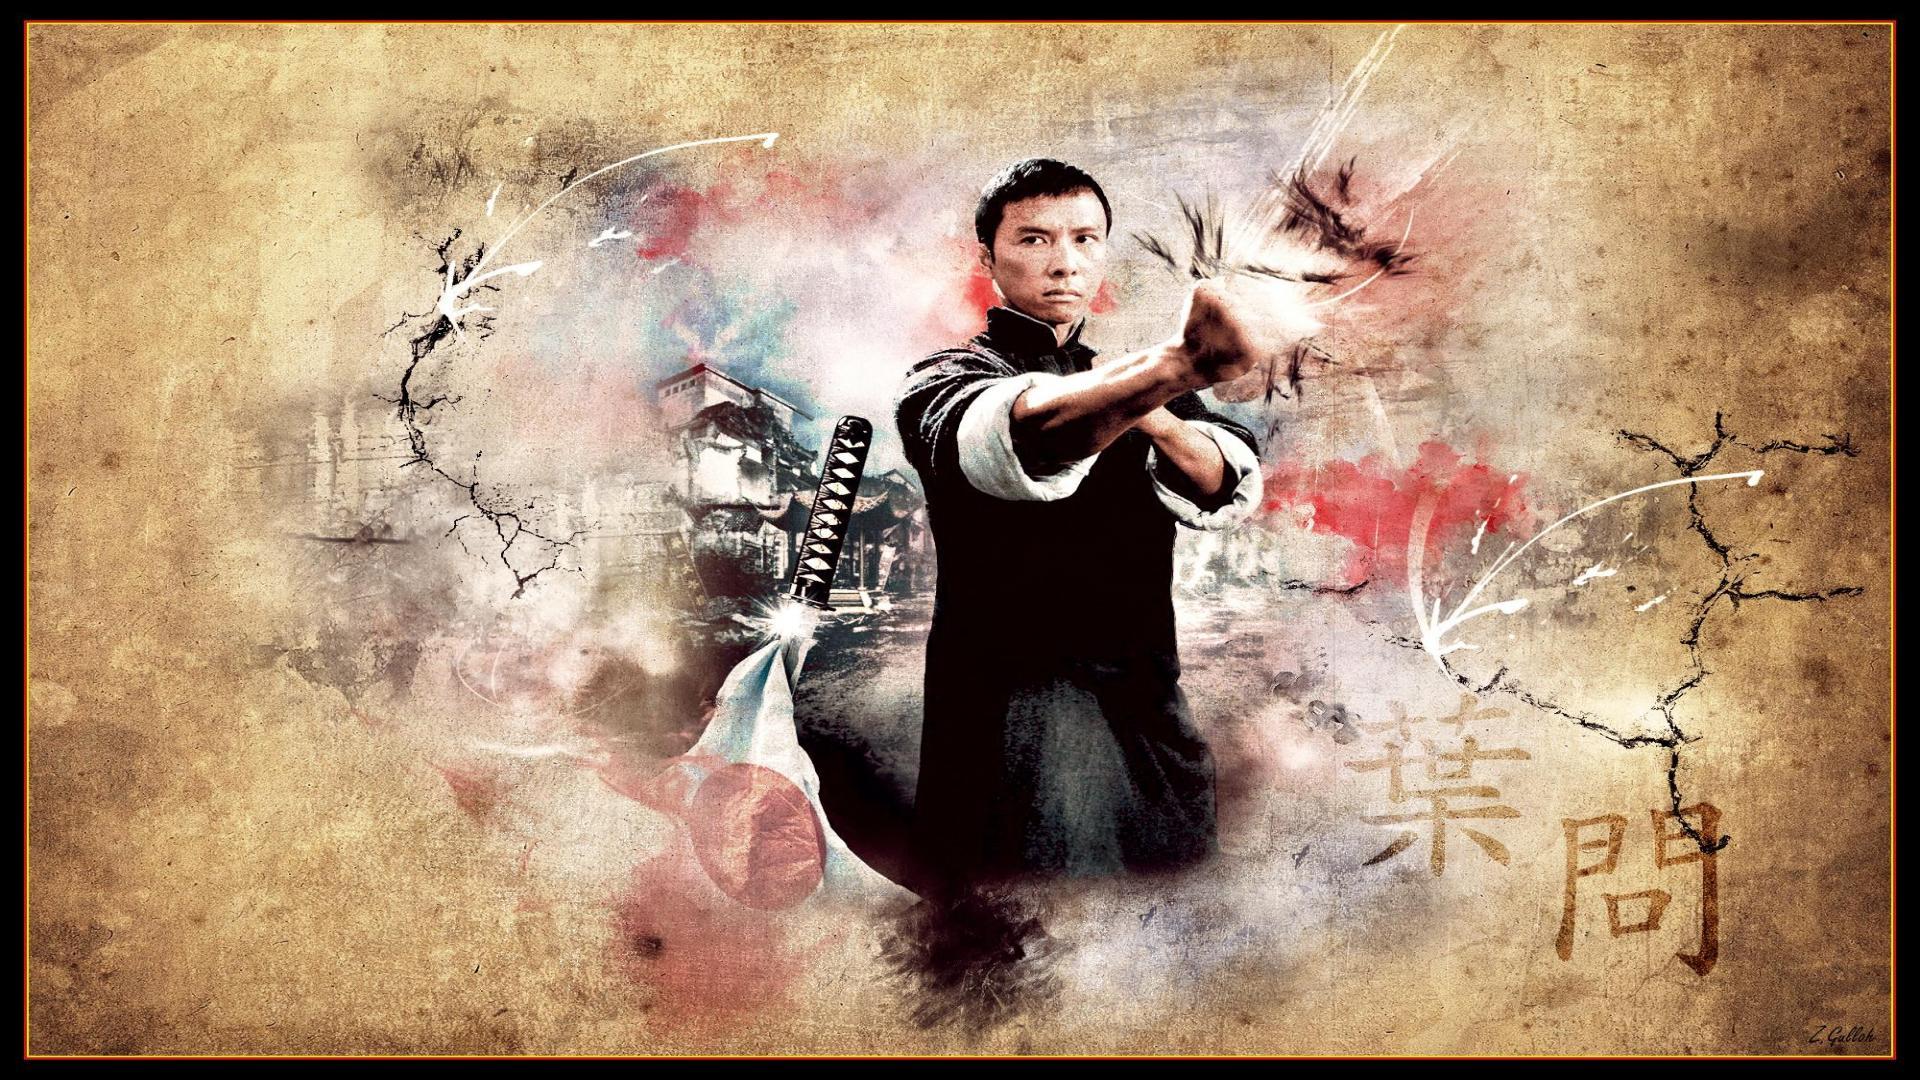 Watch Donnie Yen Kick Some Ass in Final Action-Packed Trailer For IP MAN 4  — GeekTyrant